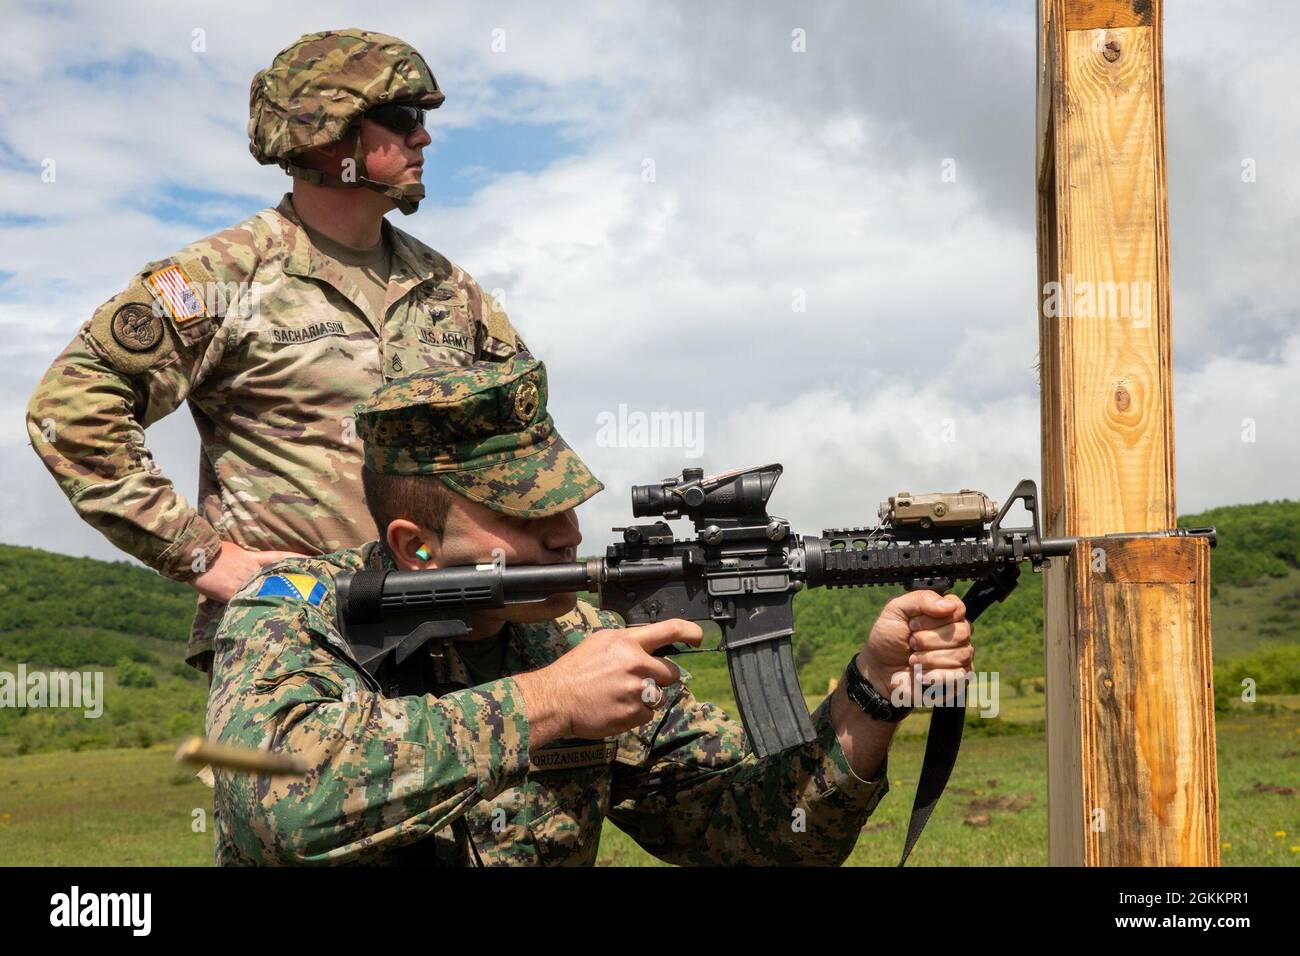 U.S. Army Staff Sgt. Justin Sachariason (left), a Soldier assigned to the Florida Army National Guard’s 2nd Battalion, 124th Infantry Regiment, 53rd Infantry Brigade Combat Team, watches as 1st Lt. Almir Sarač, a soldier from the Armed Forces of Bosnia and Herzegovina (AFBiH), shoots the M4A1 Carbine at Manjača Training Area, Bosnia and Herzegovina (BiH), May 19, 2021. The 2-124th Soldiers will work alongside the AFBiH in a joint training exercise called Immediate Response 21, which supports DEFENDER-Europe 21. DEFENDER-Europe 21 is a prime example of U.S. forces working together closely with Stock Photo